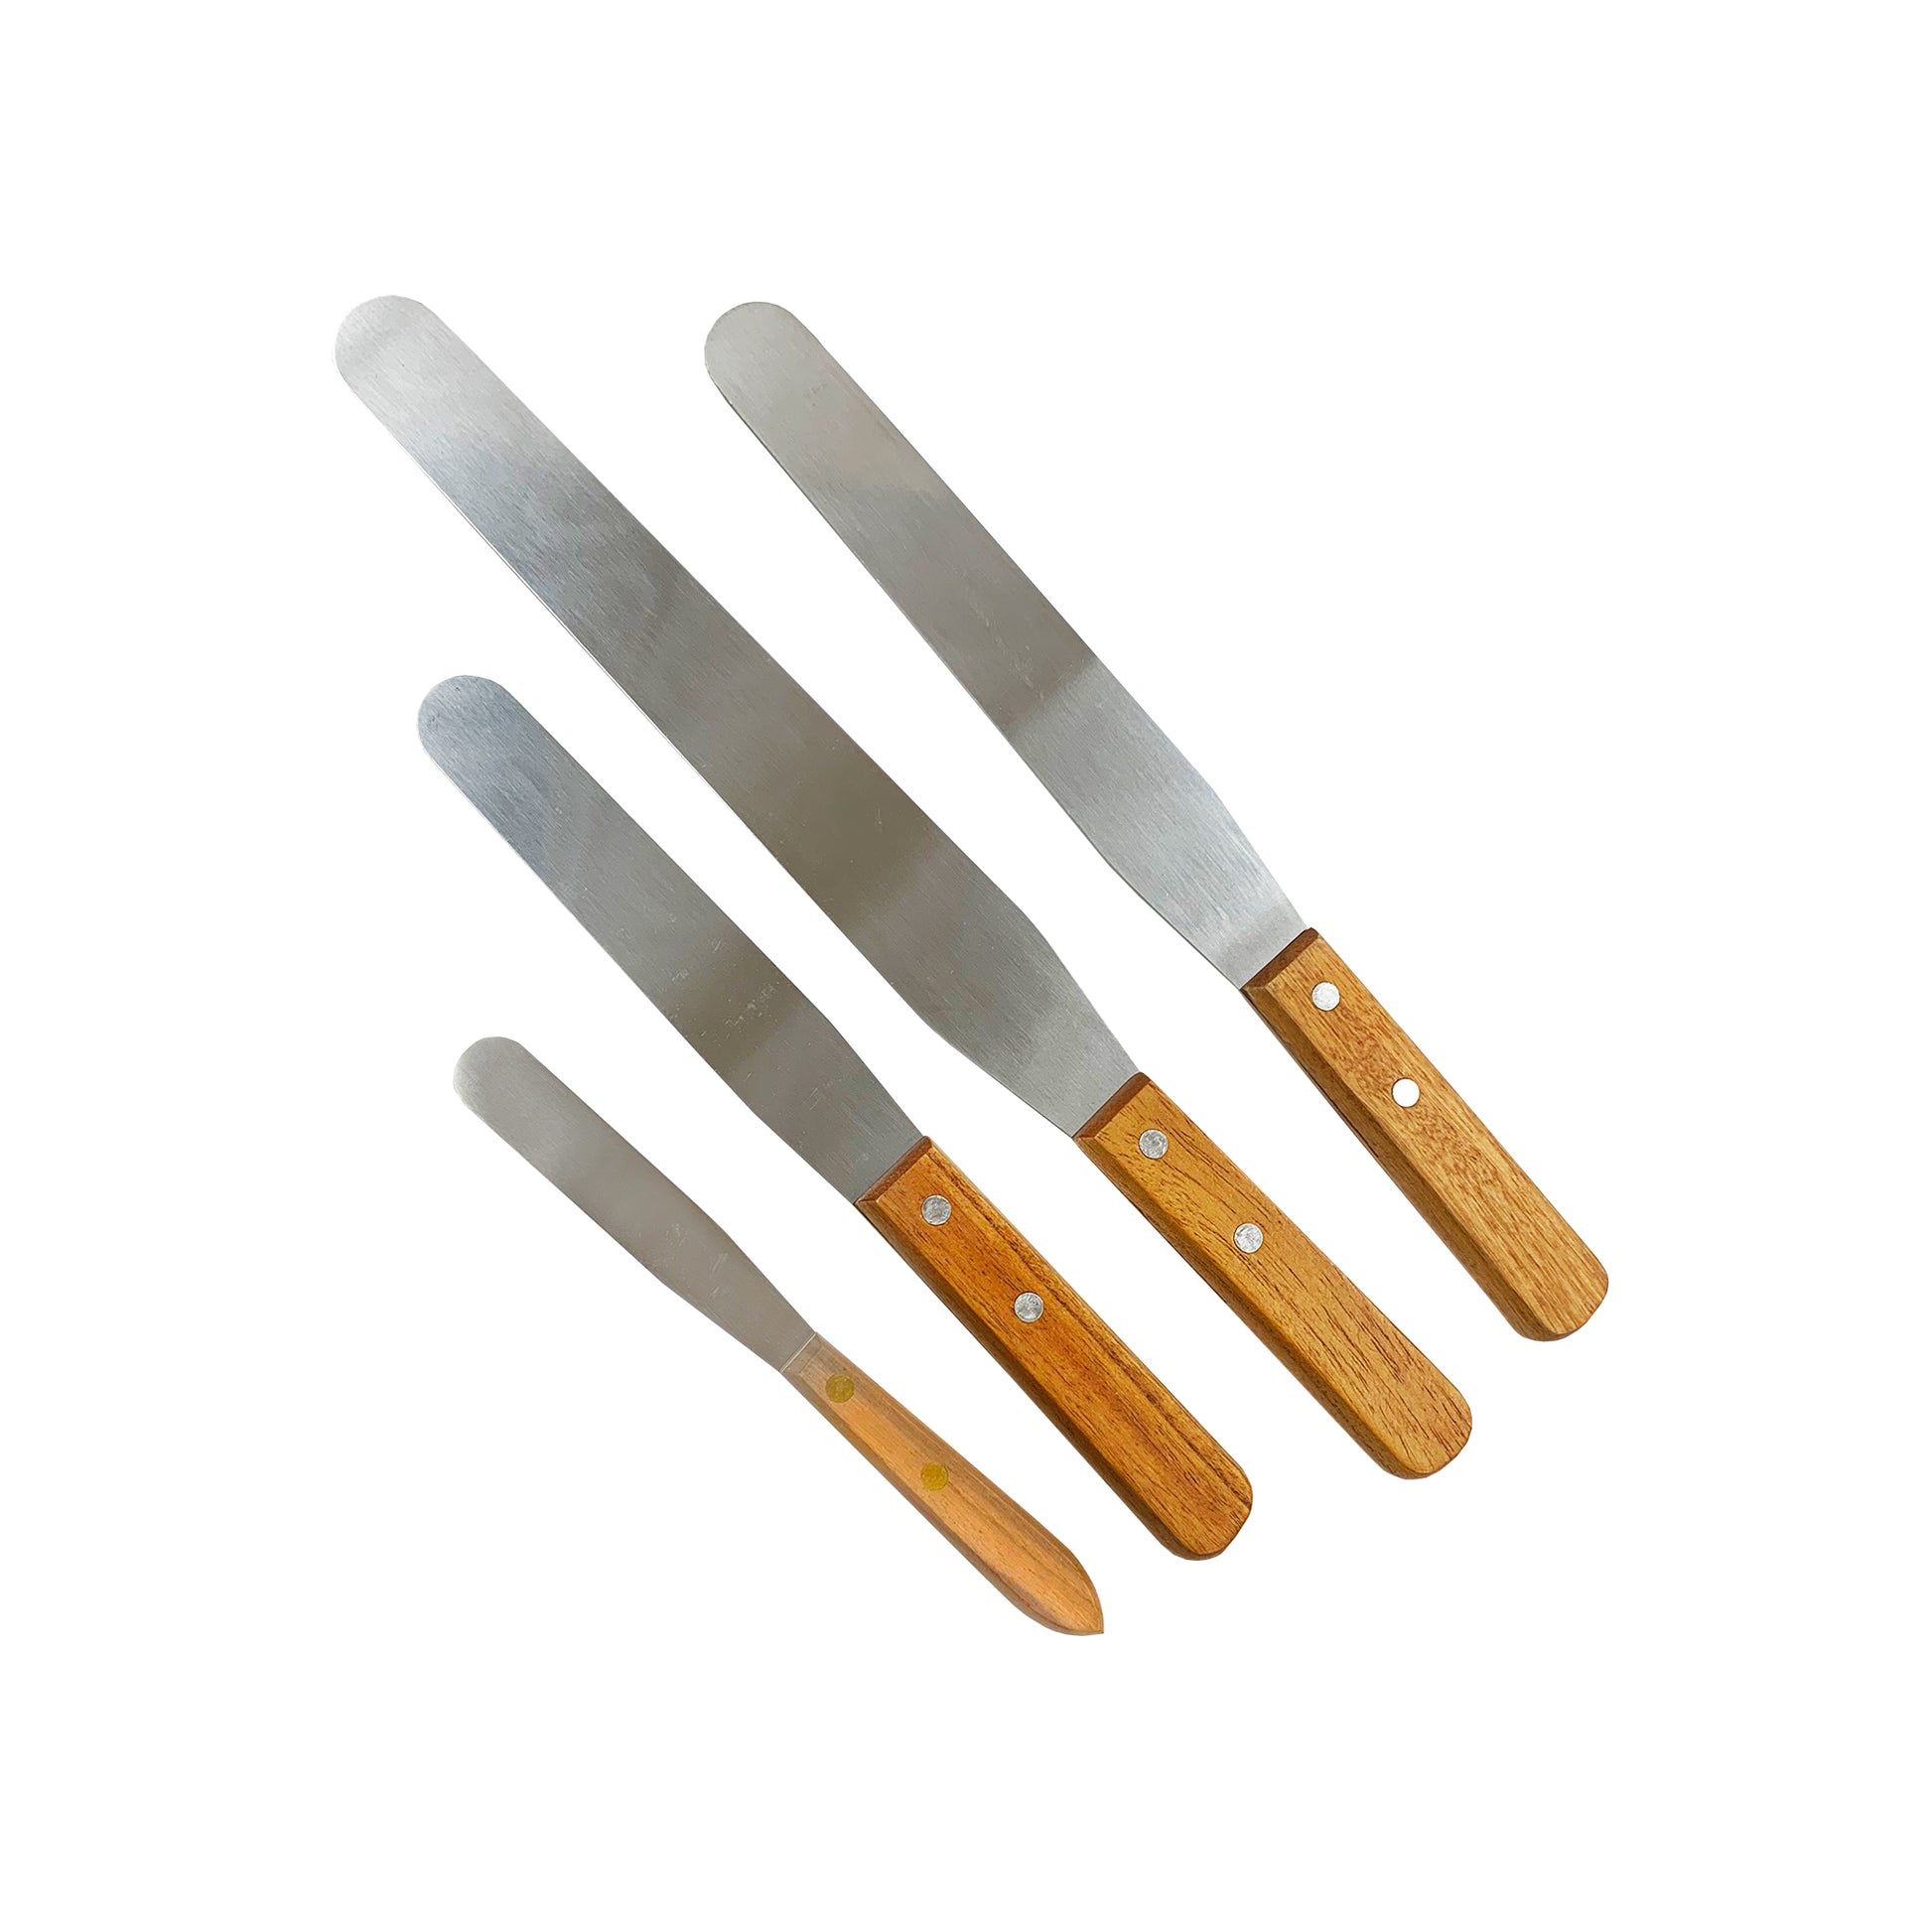 Stainless Steel Ink Spatulas-Textile Plastisol Ink Tools-Lawson Screen & Digital Products Lawson Screen & Digital Products dtf printer screen printing direct to fabric equipment machine printers equipment dtg printer screen printing direct to garment equipment machine printers